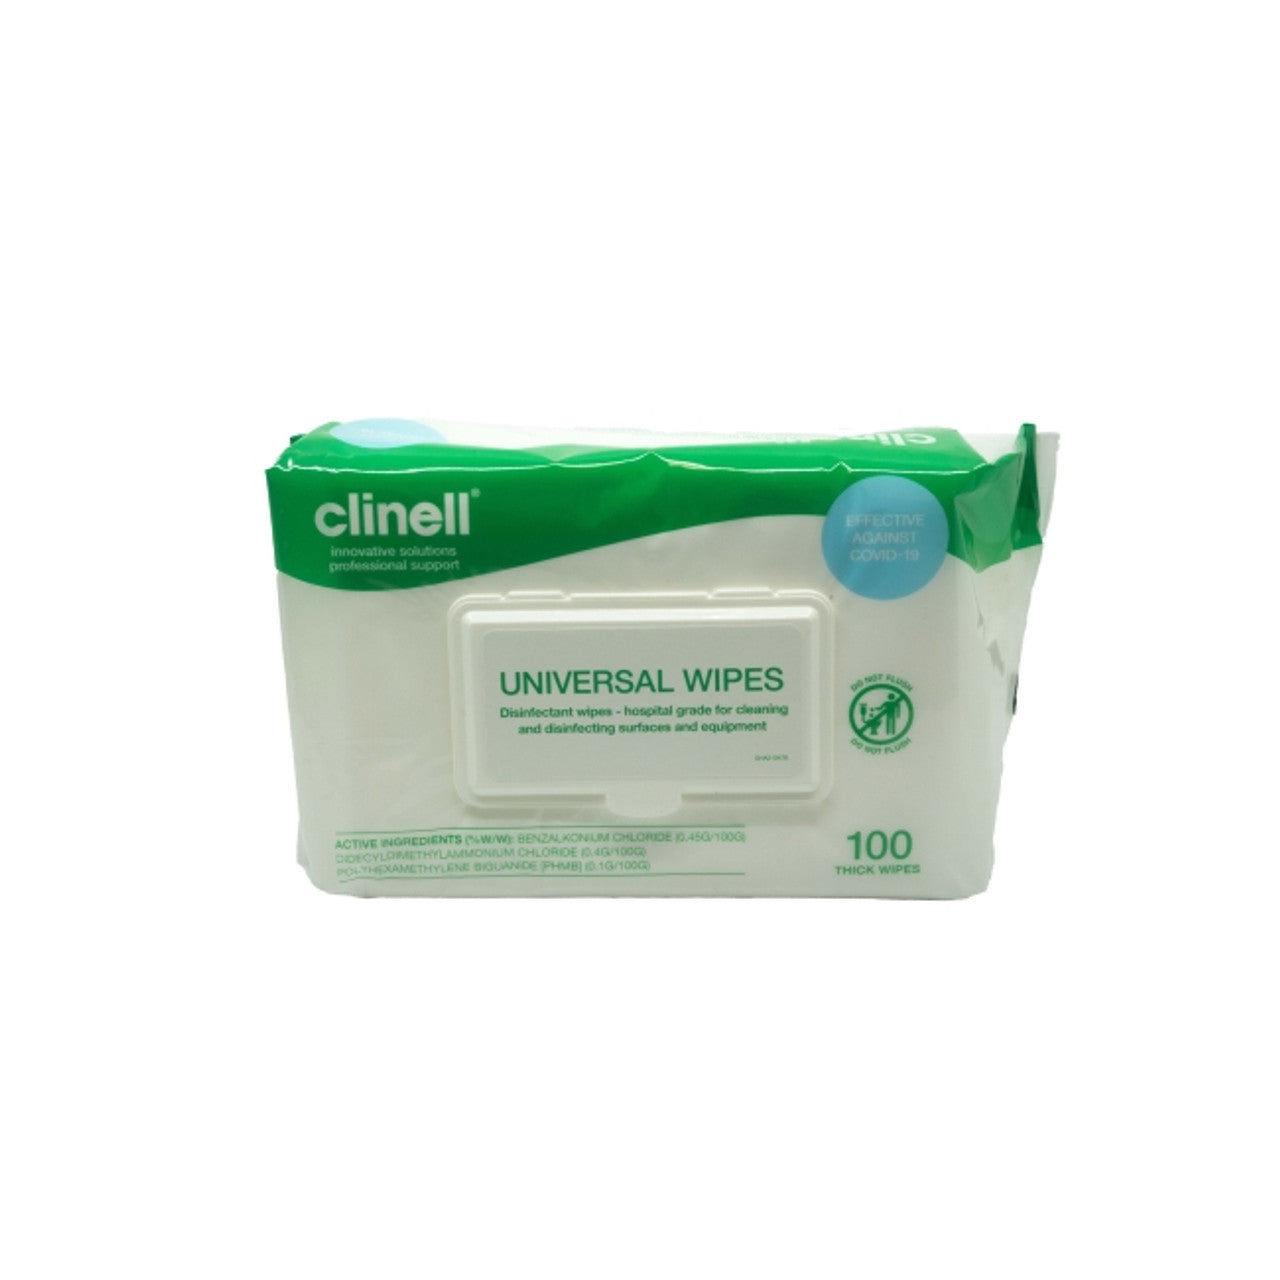 Clinell Universal Wipes - Thick Wipes Packet (100pcs)